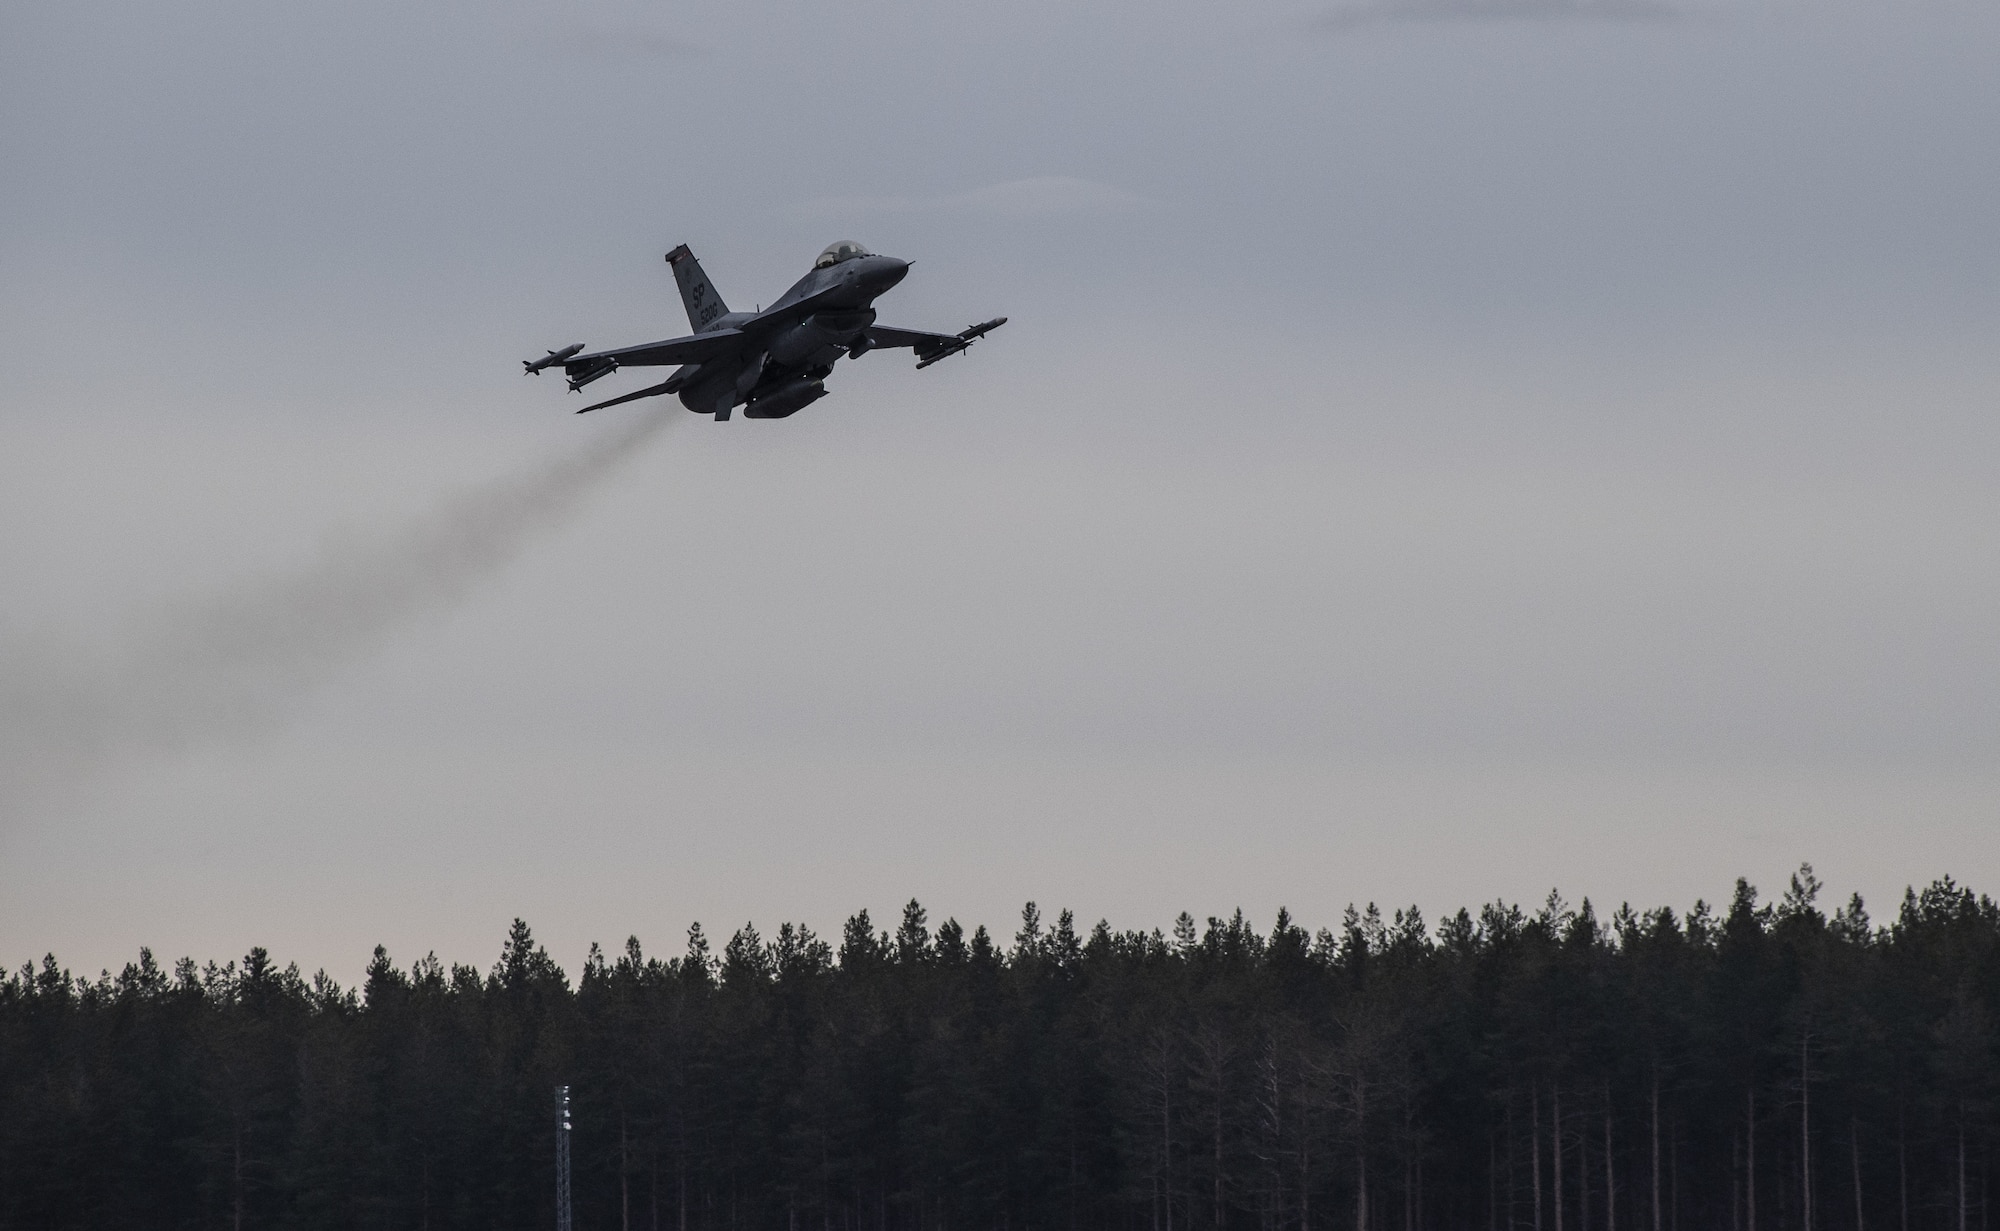 A U.S. Air Force F-16 Fighting Falcon from the 480th Fighter Squadron at Spangdahlem Air Base, Germany, takes off from the runway at Kallax Air Base, Sweden, May 19, 2021. Airmen from the 52nd Fighter Wing deployed to Sweden two weeks prior to the start of Arctic Challenge Exercise 2021 in order to maximize training with the Swedish air force during Spangdahlem's flightline repairs. (U.S. Air Force photo by Senior Airman Ali Stewart)